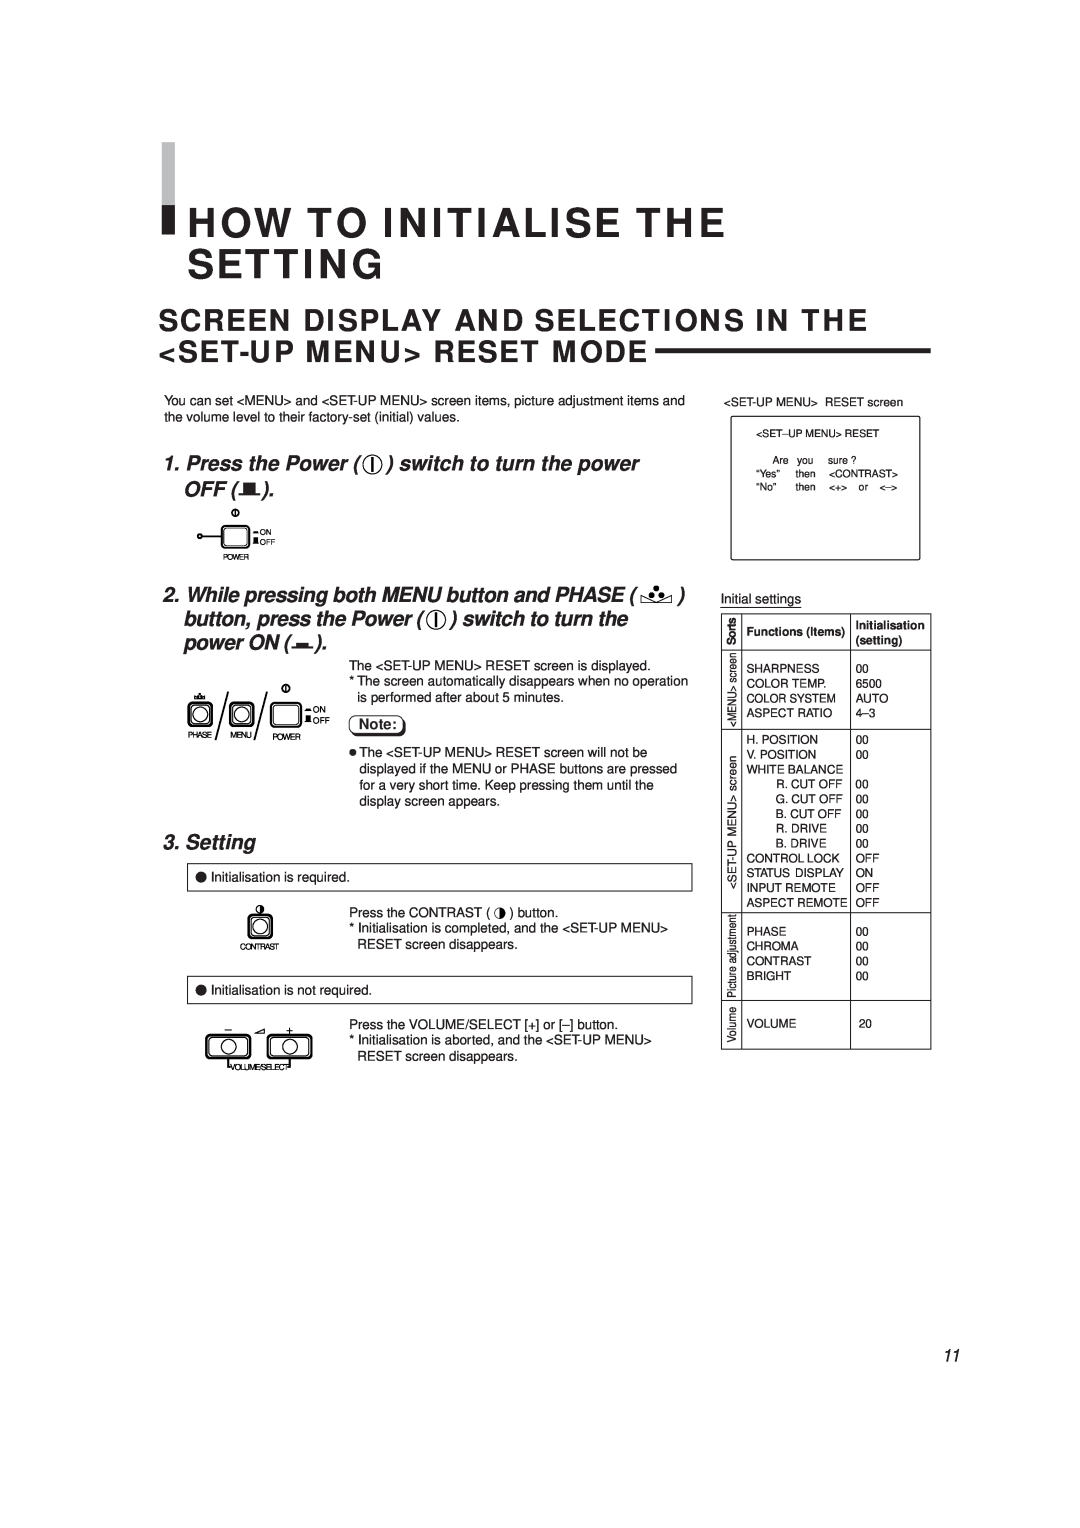 JVC TM-H1375SU How To Initialise The Setting, Screen Display And Selections In The Set-Up Menu Reset Mode, power ON g 